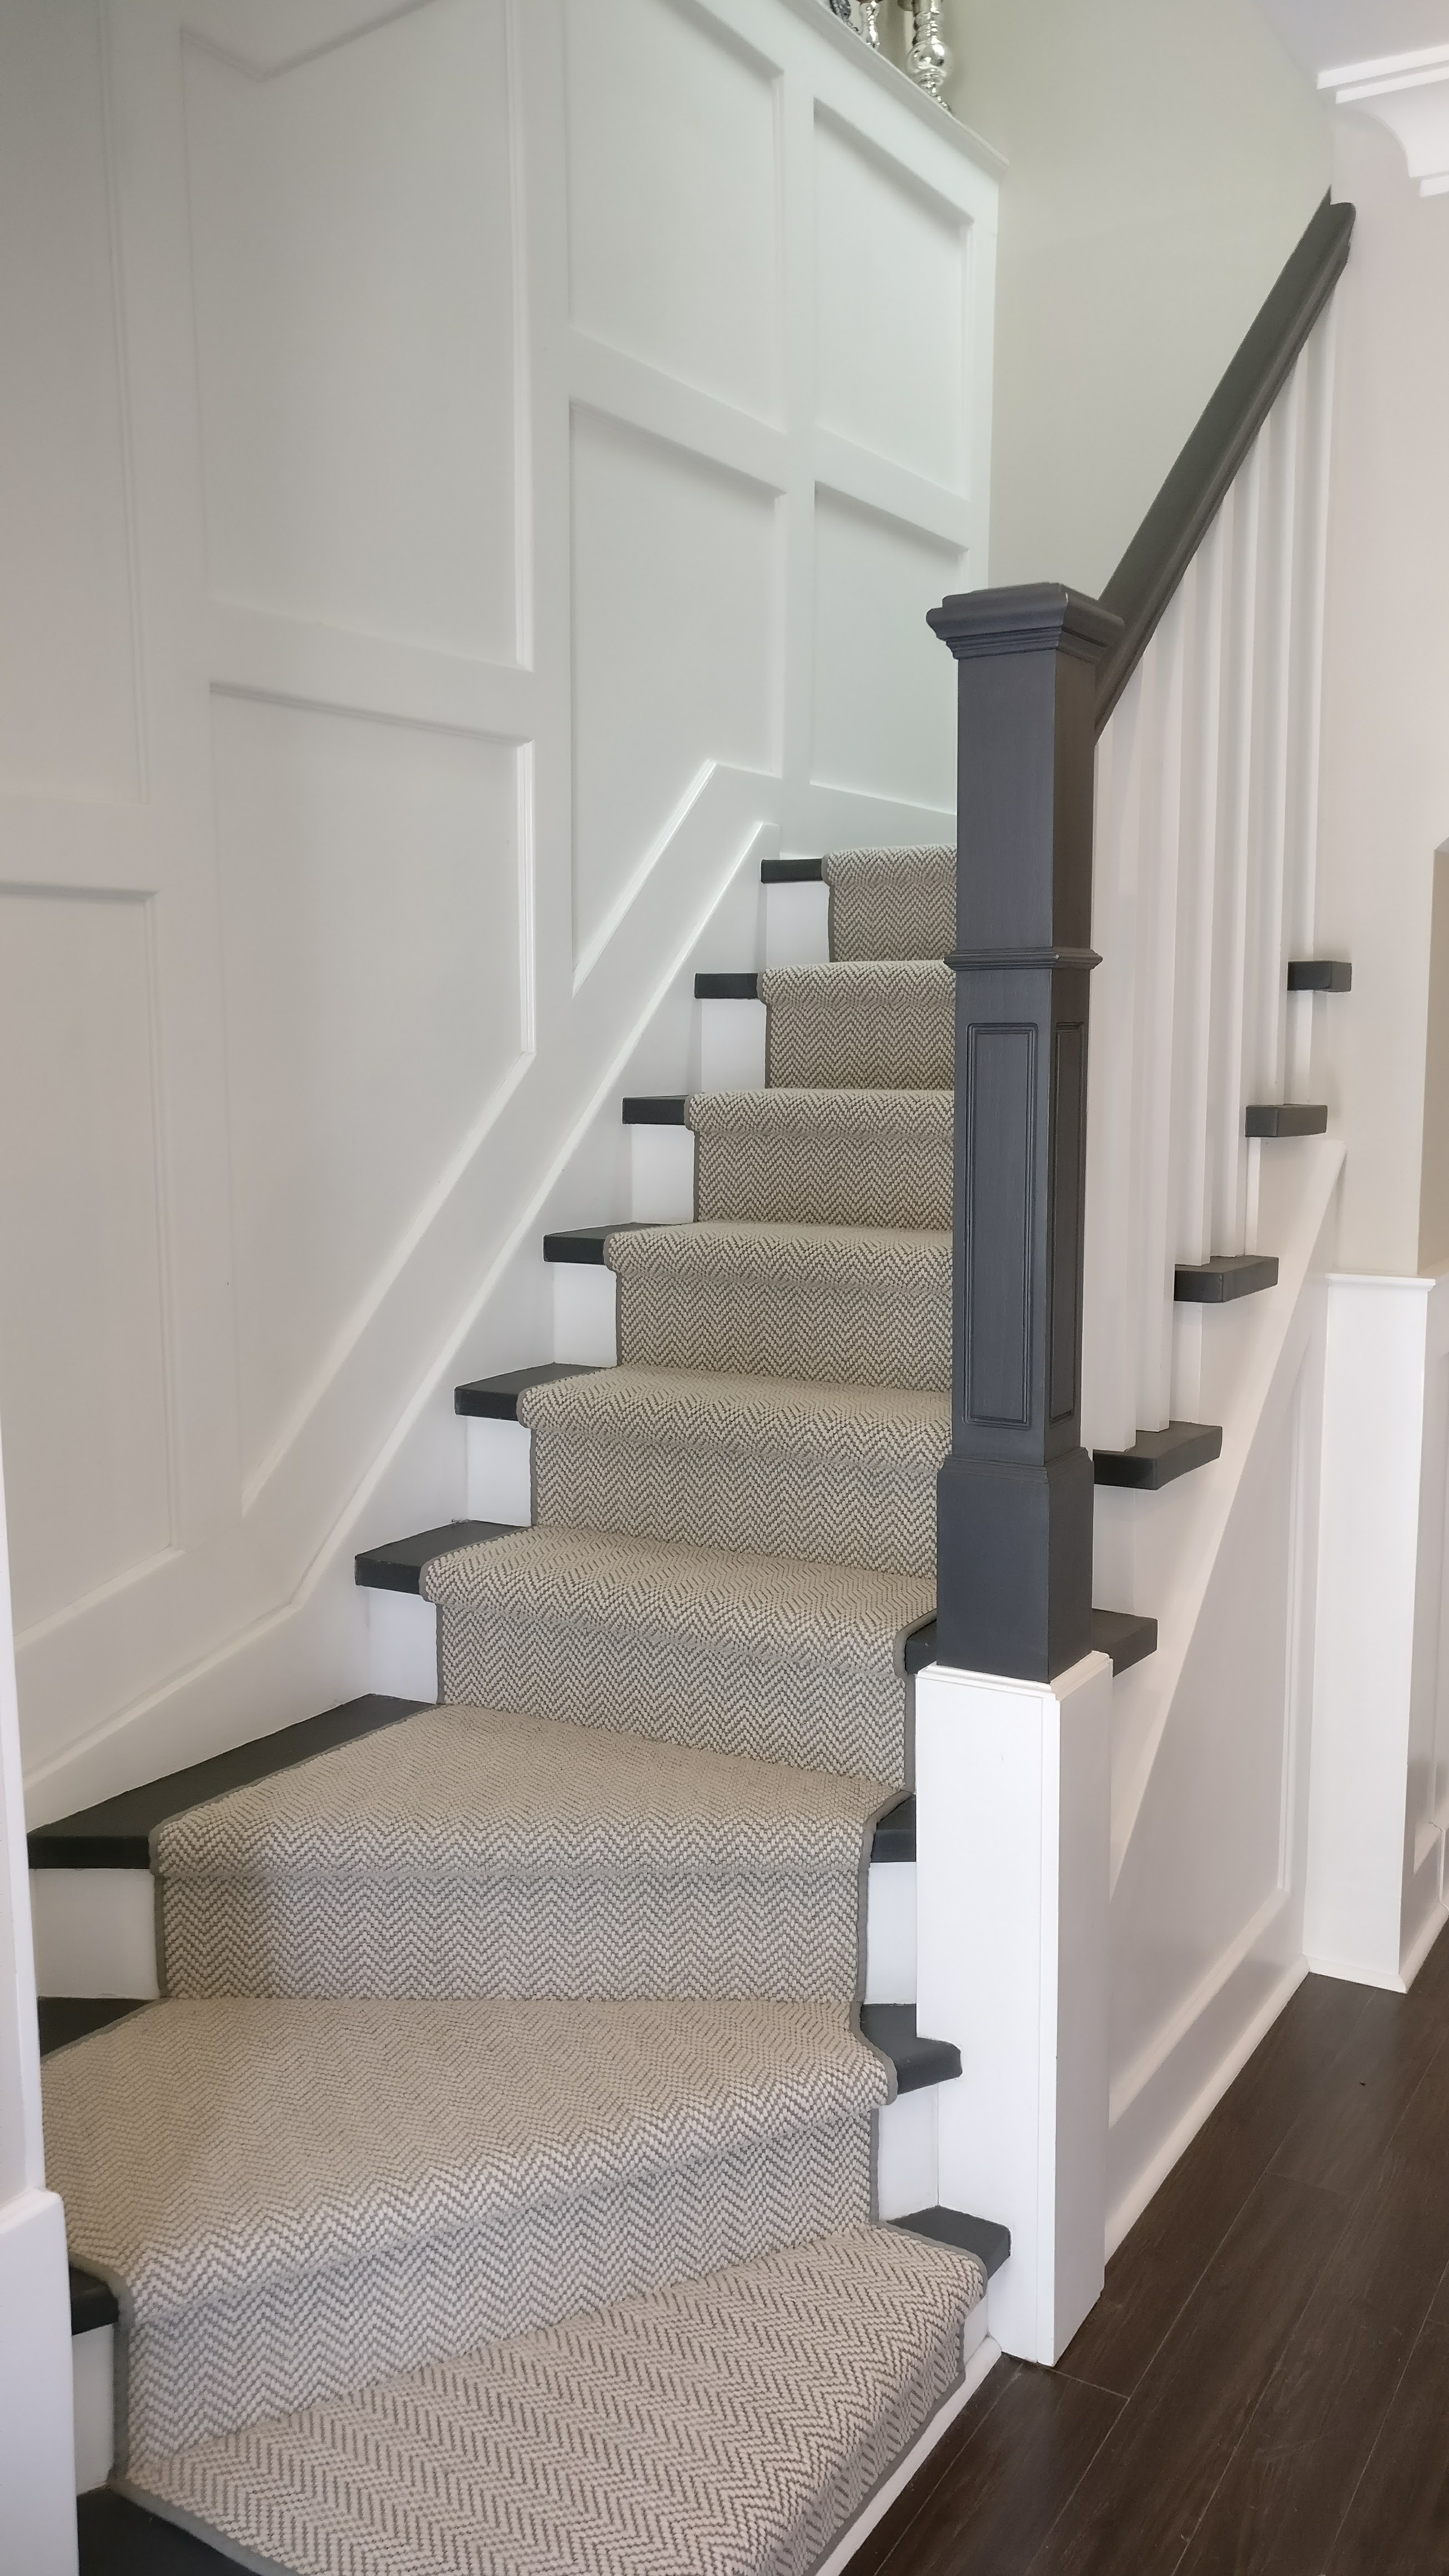 Refinish Stairs | Install new Handrail |Love Your Stairs